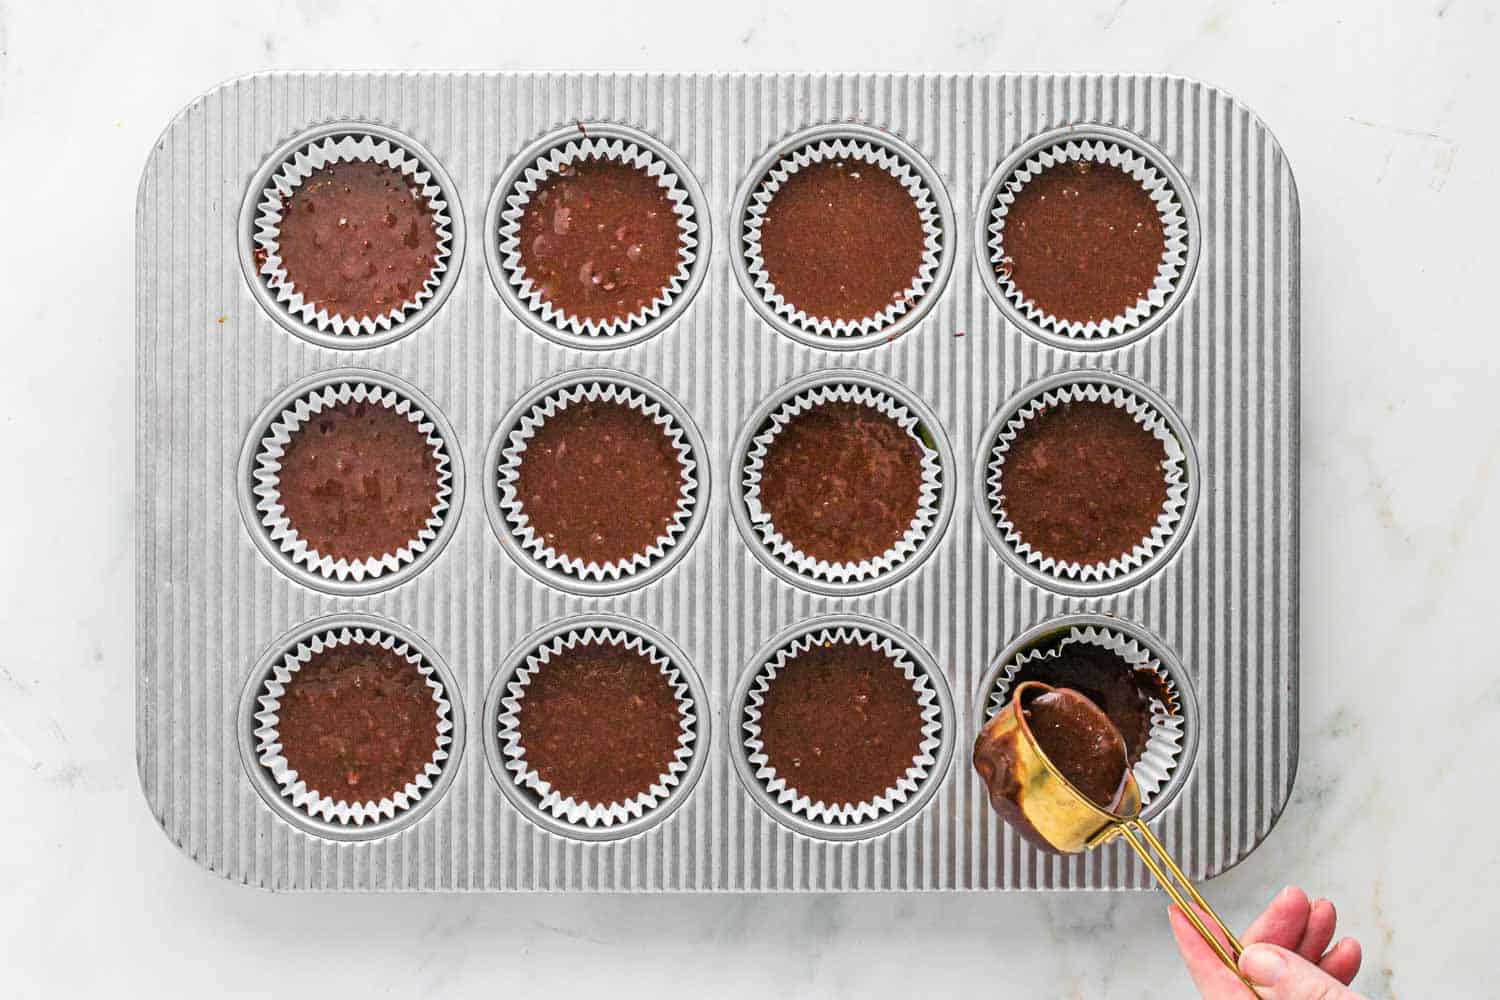 Chocolate batter in a muffin pan